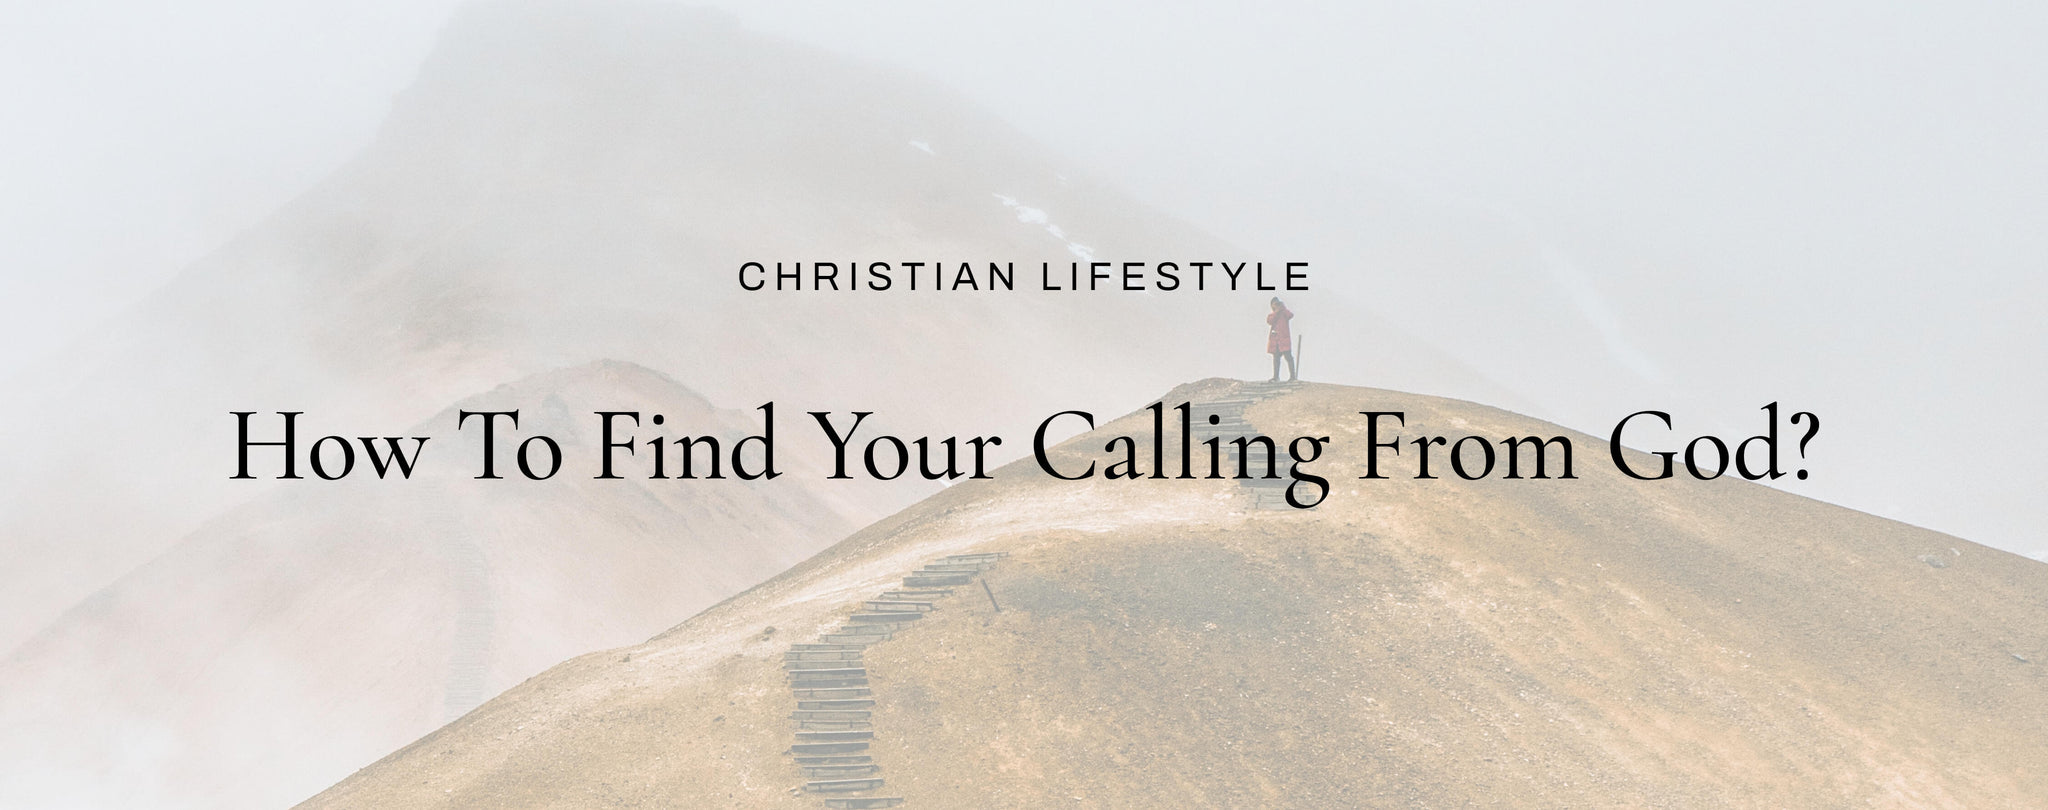 How to Find Your Calling From God